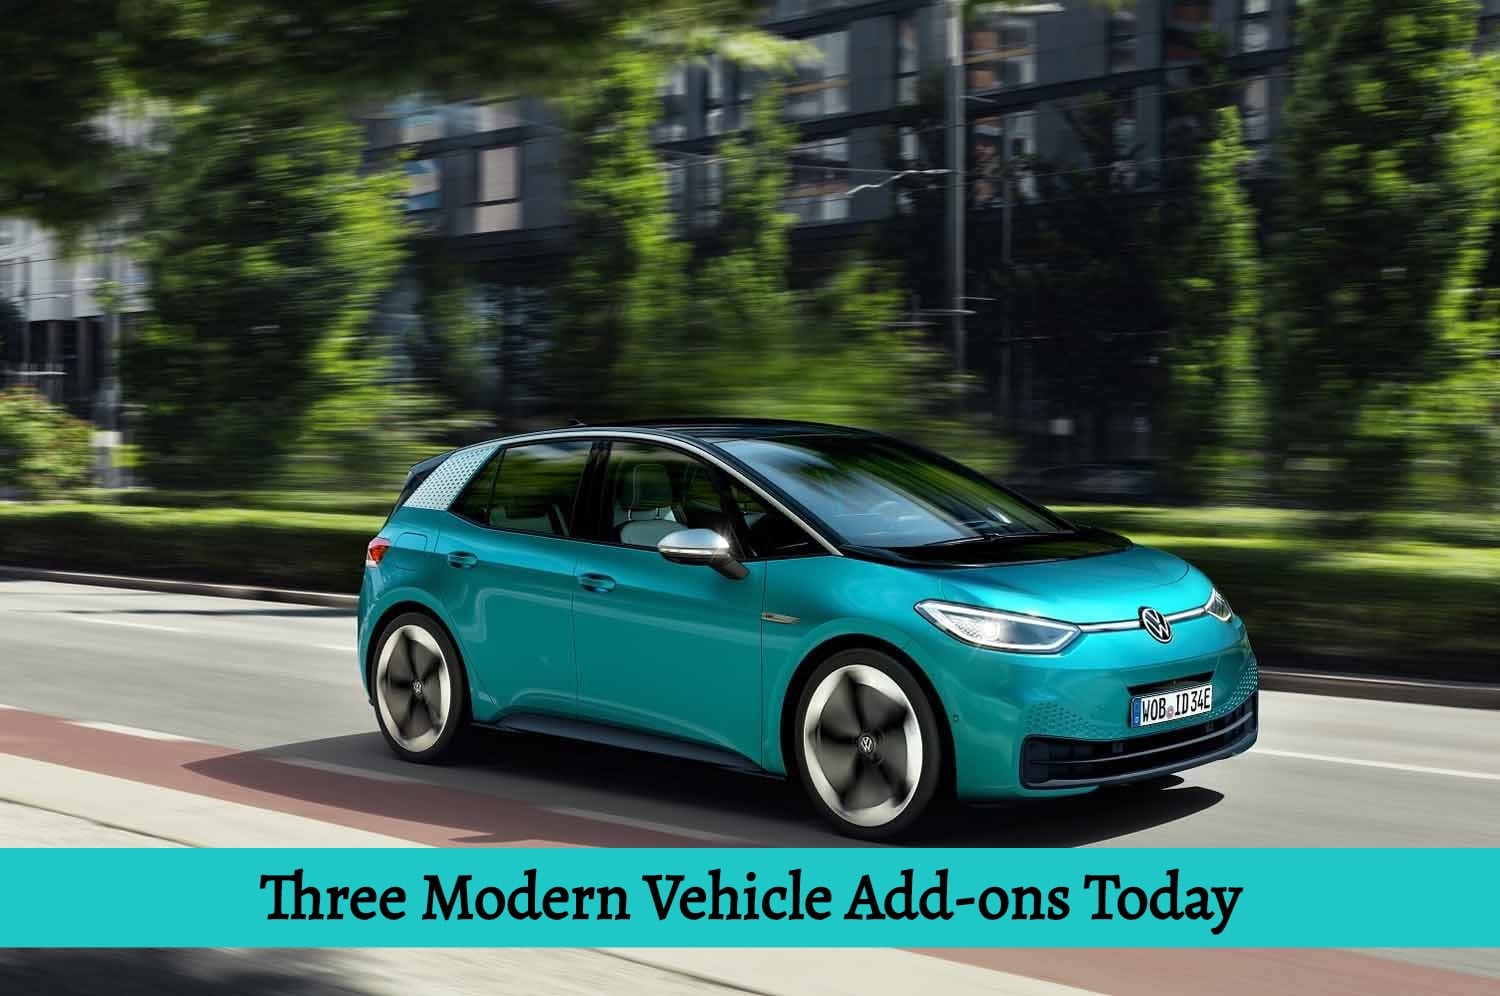 Three Modern Vehicle Add-ons Today